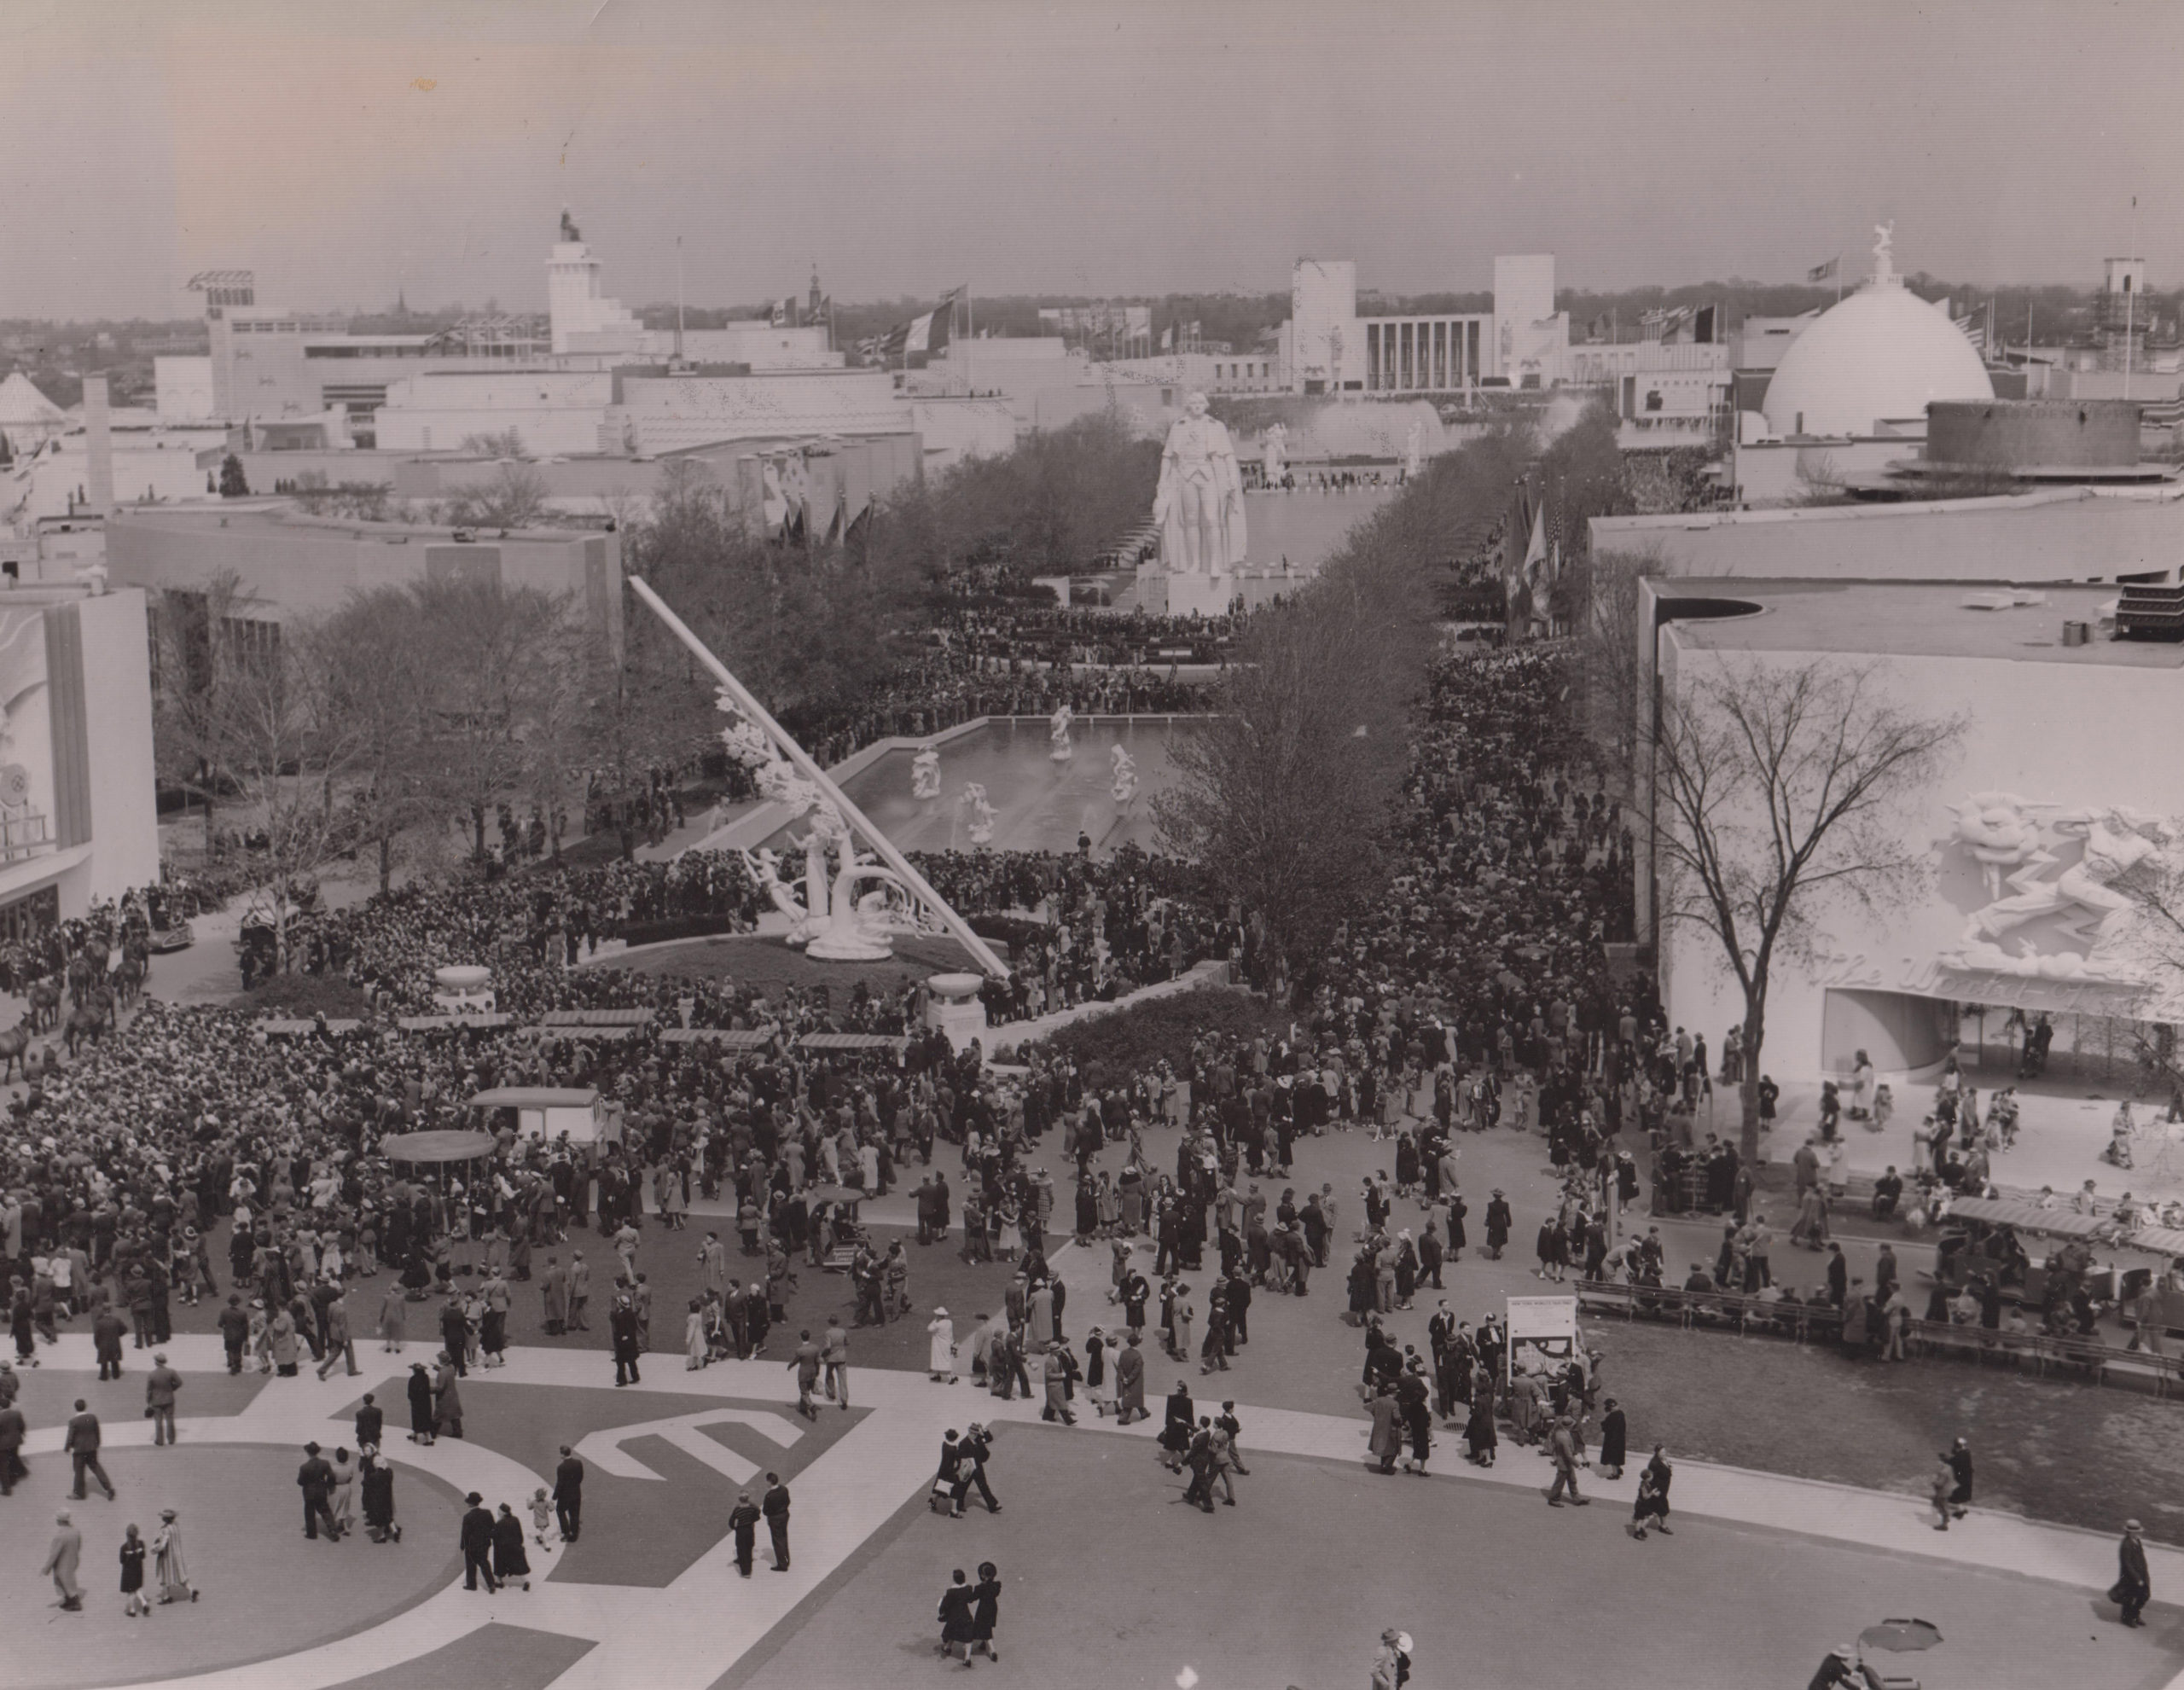 A black and white photograph of an upside down t-shaped plaza. A sea of patrons pack the streets. In the center aisle are monuments and fountains. The plaza is lined by two rows of trees and pavilions. 